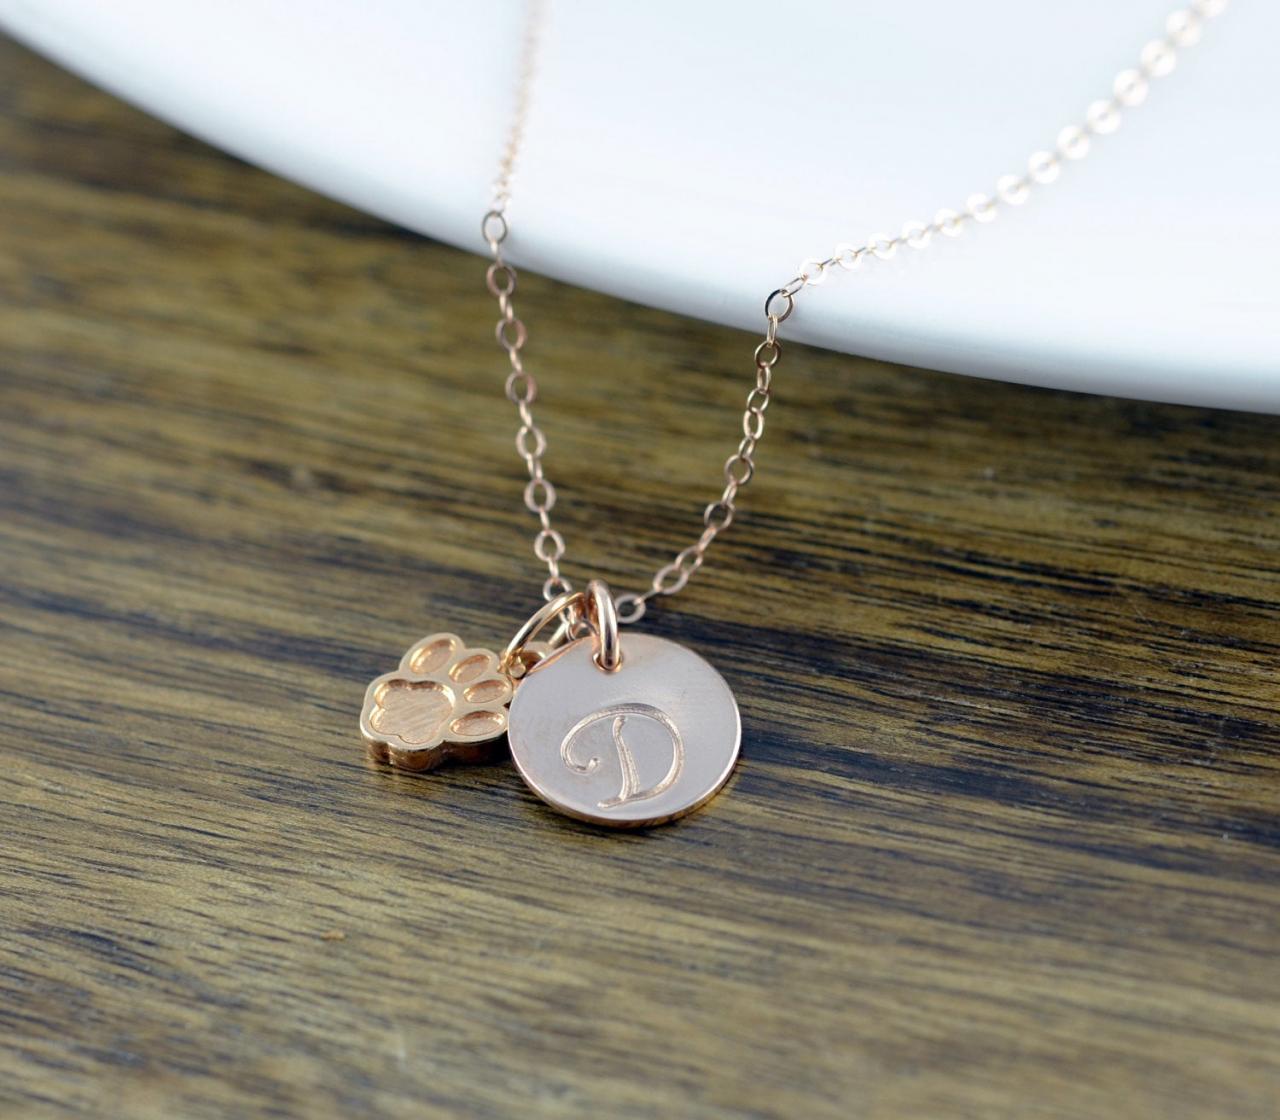 Dog Paw Necklace, Dog Paw Jewelry, Dog Mom Gift, Personalized Initial Necklace, Personalized Rose Gold Necklace, Dog Paw Charm, Gift For Her